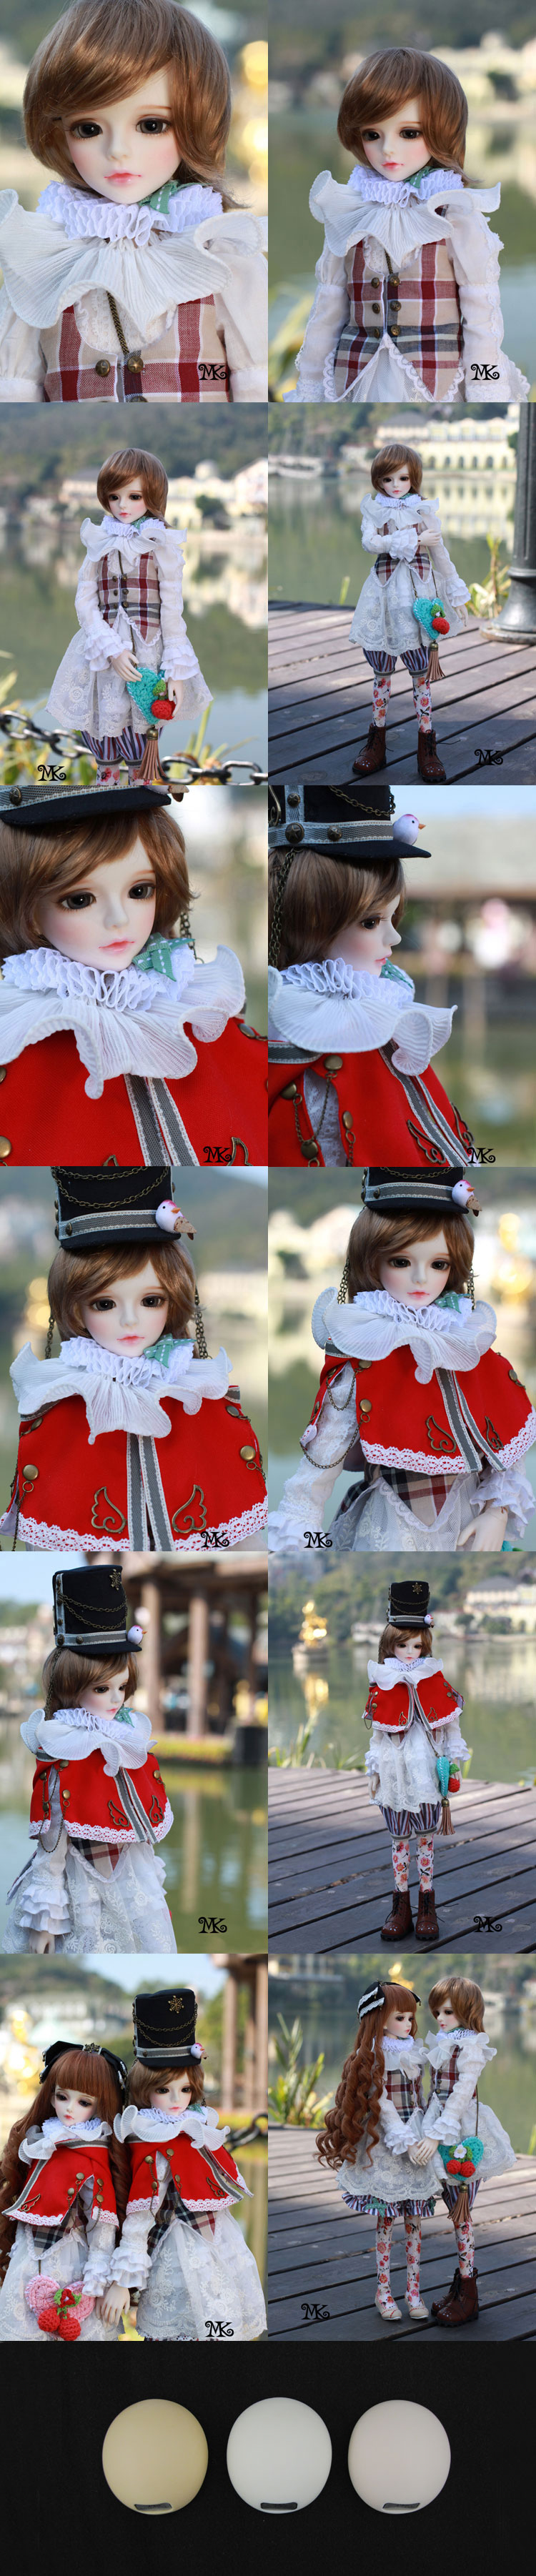 BJD Illy 46cm Boy Ball-jointed doll